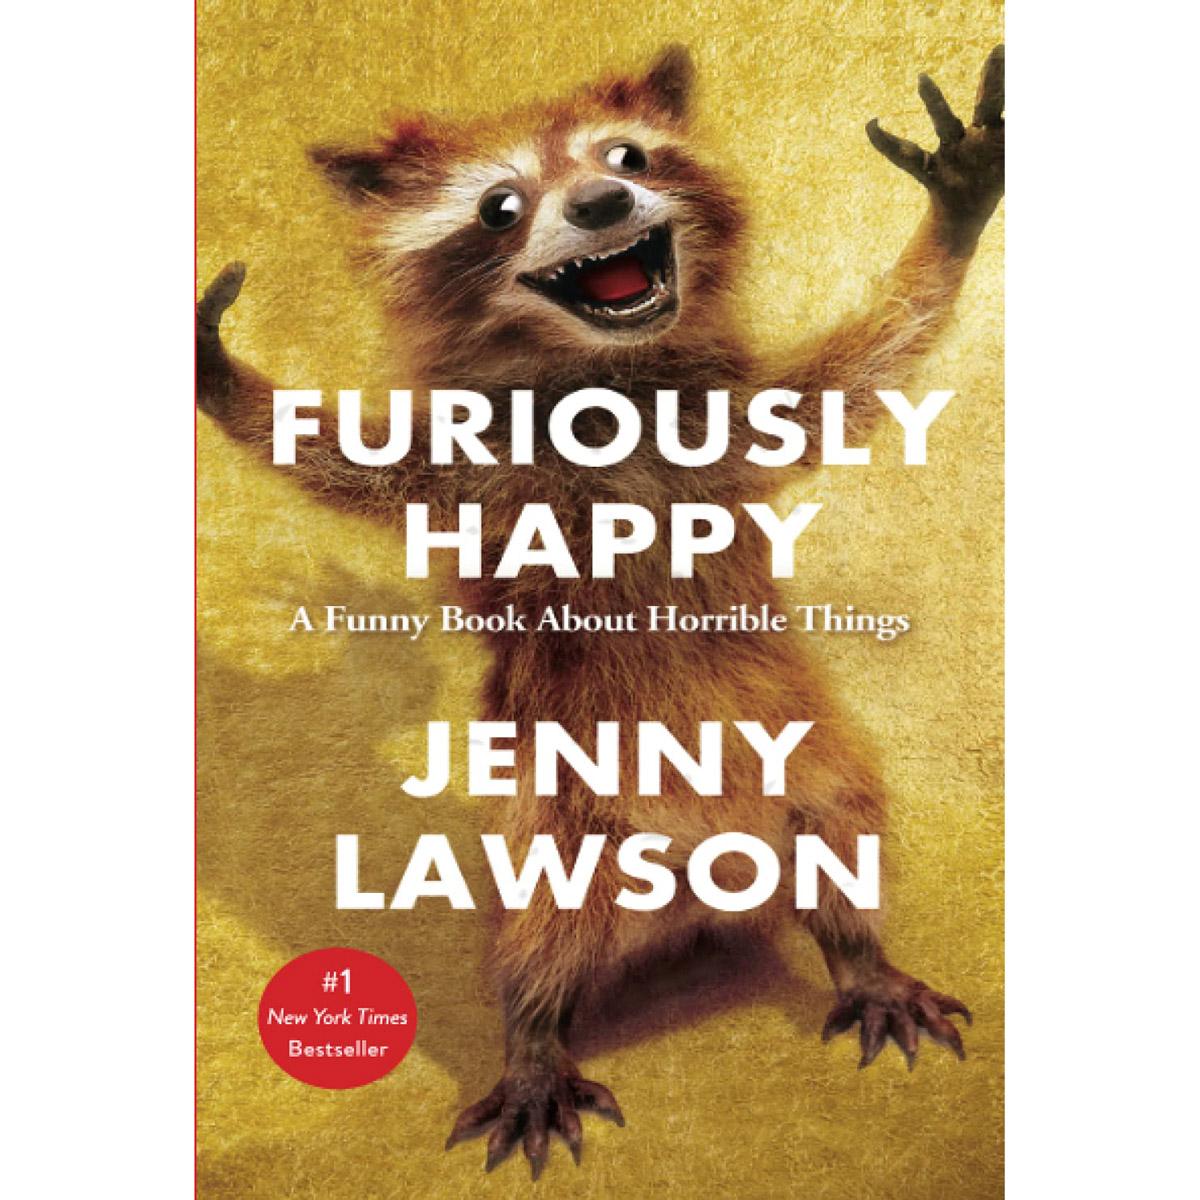 Furiously Happy A Funny Book About Horrible Things eBook for $2.99